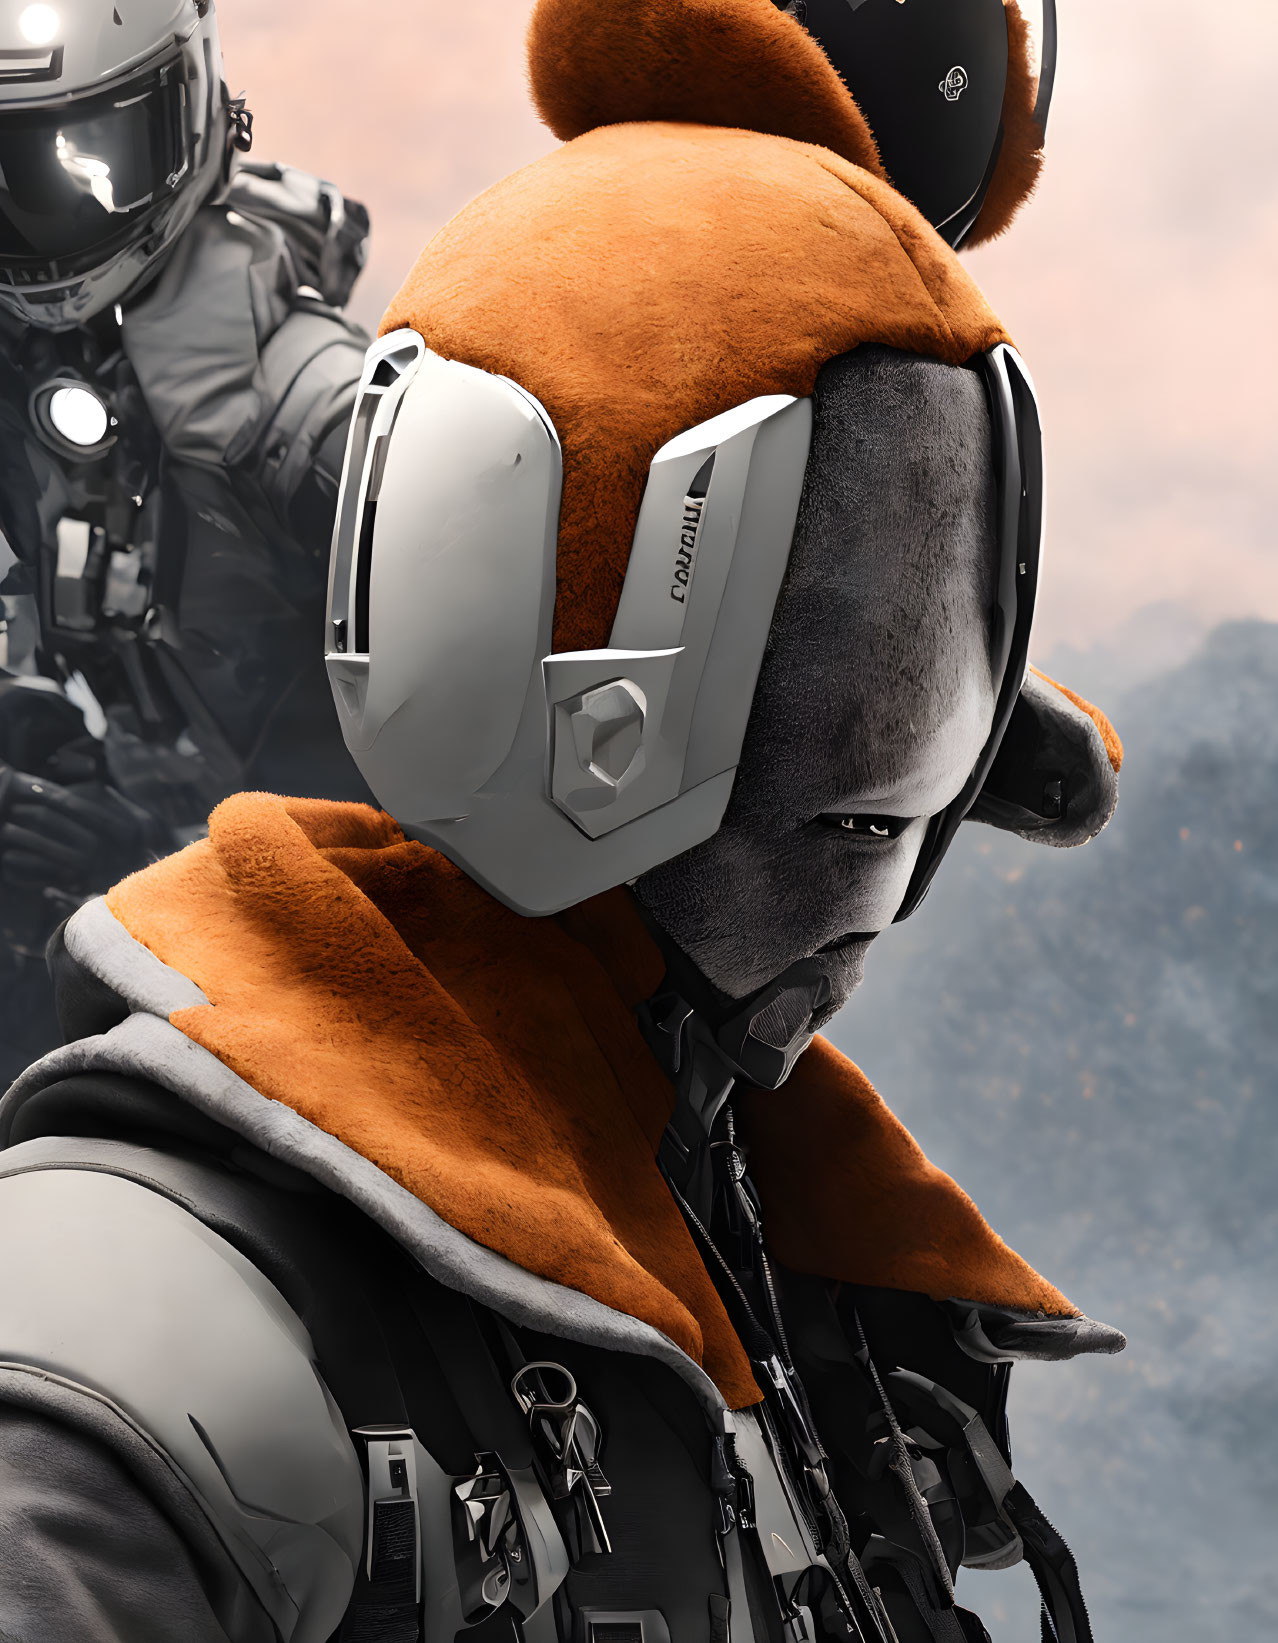 Orange Flight Suit and Futuristic Helmet Character with Background Figure in Armor